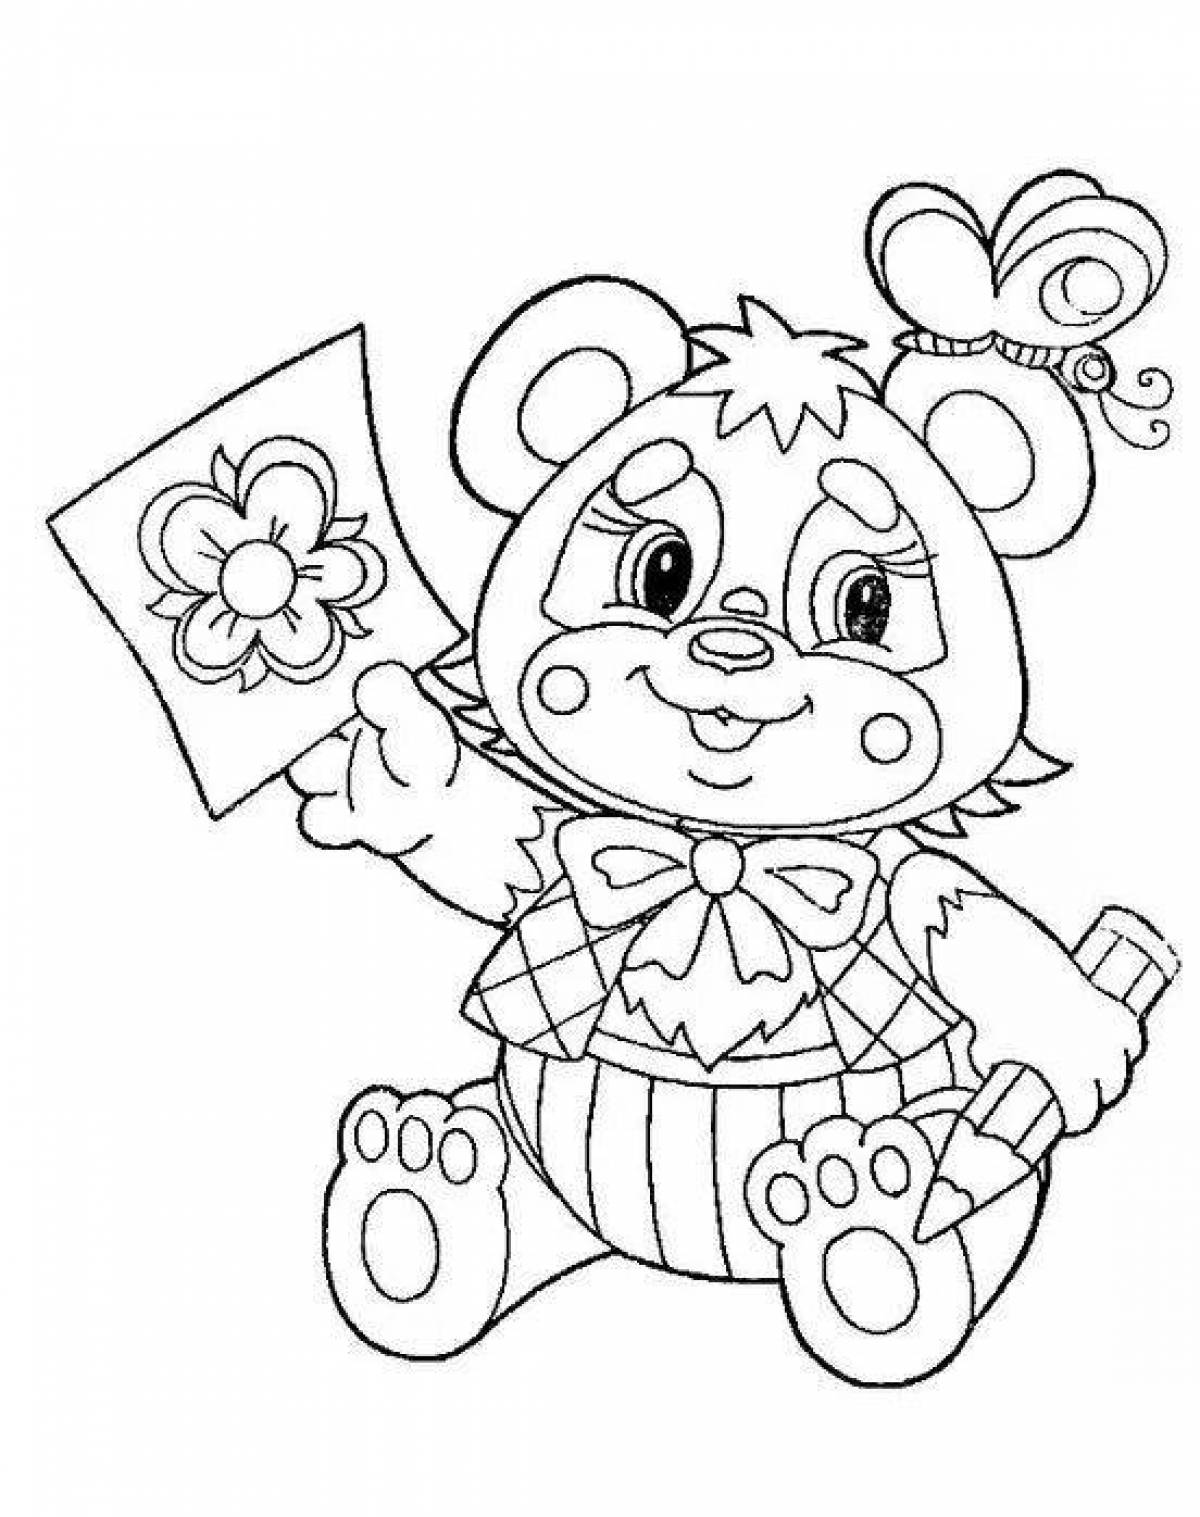 Adorable pink elephant coloring page